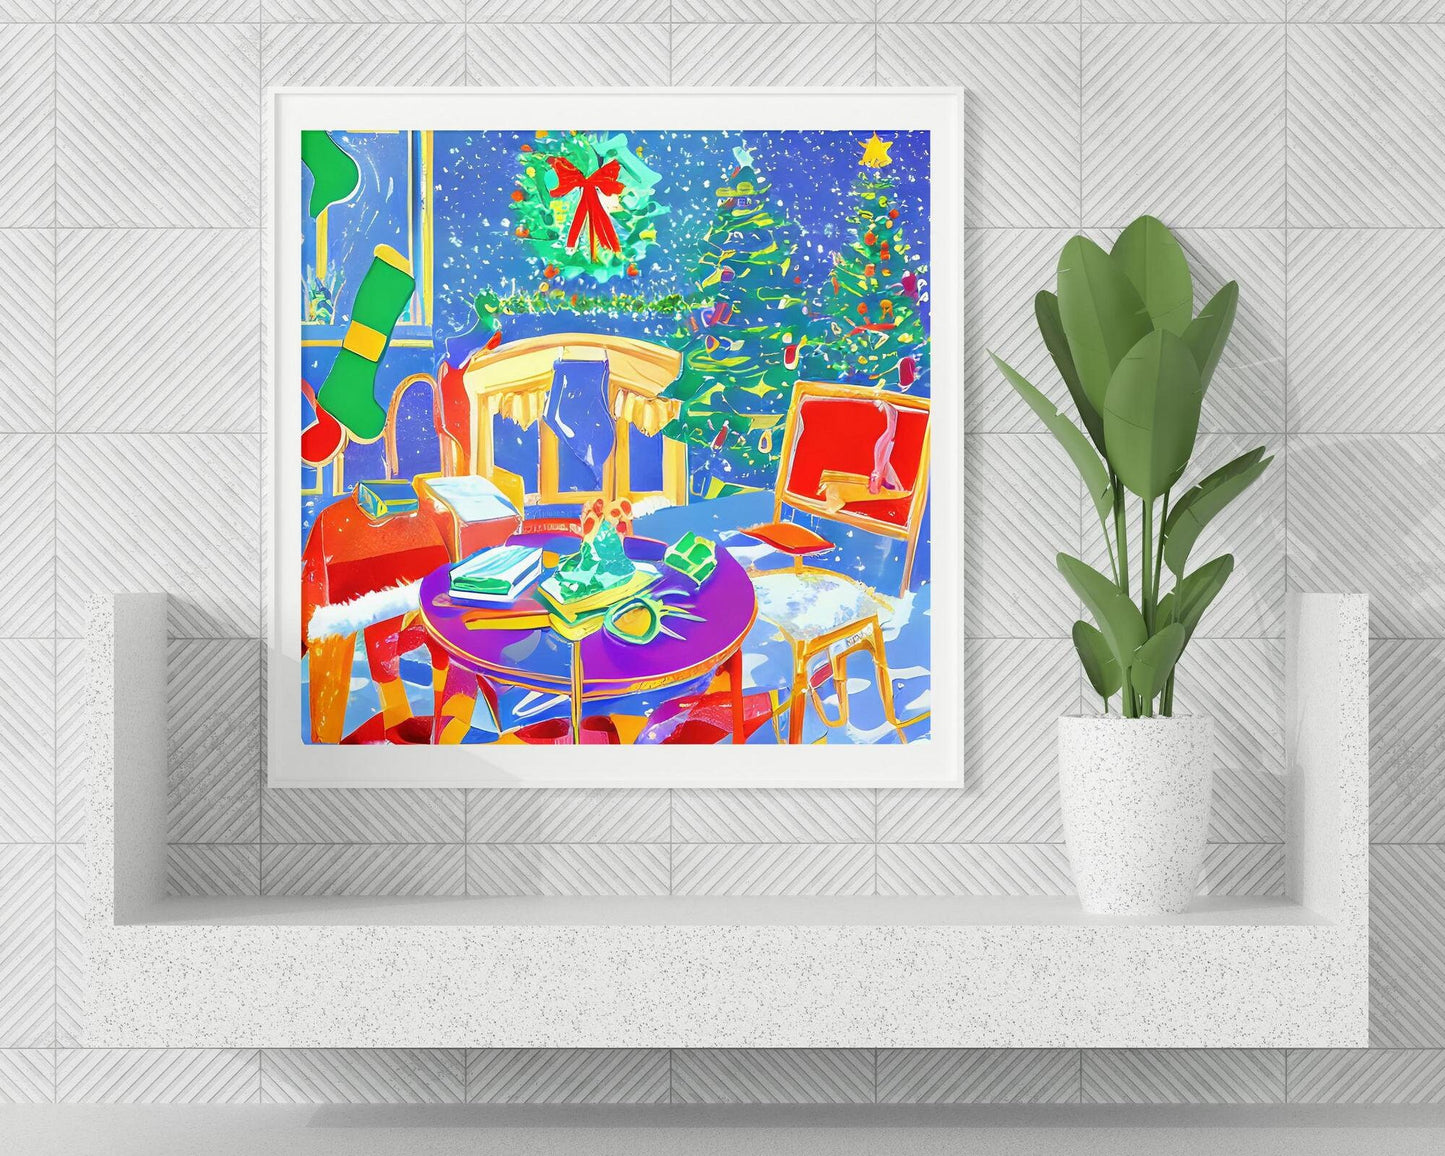 Window Of A Street Shop Decorated For Christmas Canvas Print, Art Prints, Abstract Print, Kids Room, Framed Art Print, Original Watercolor